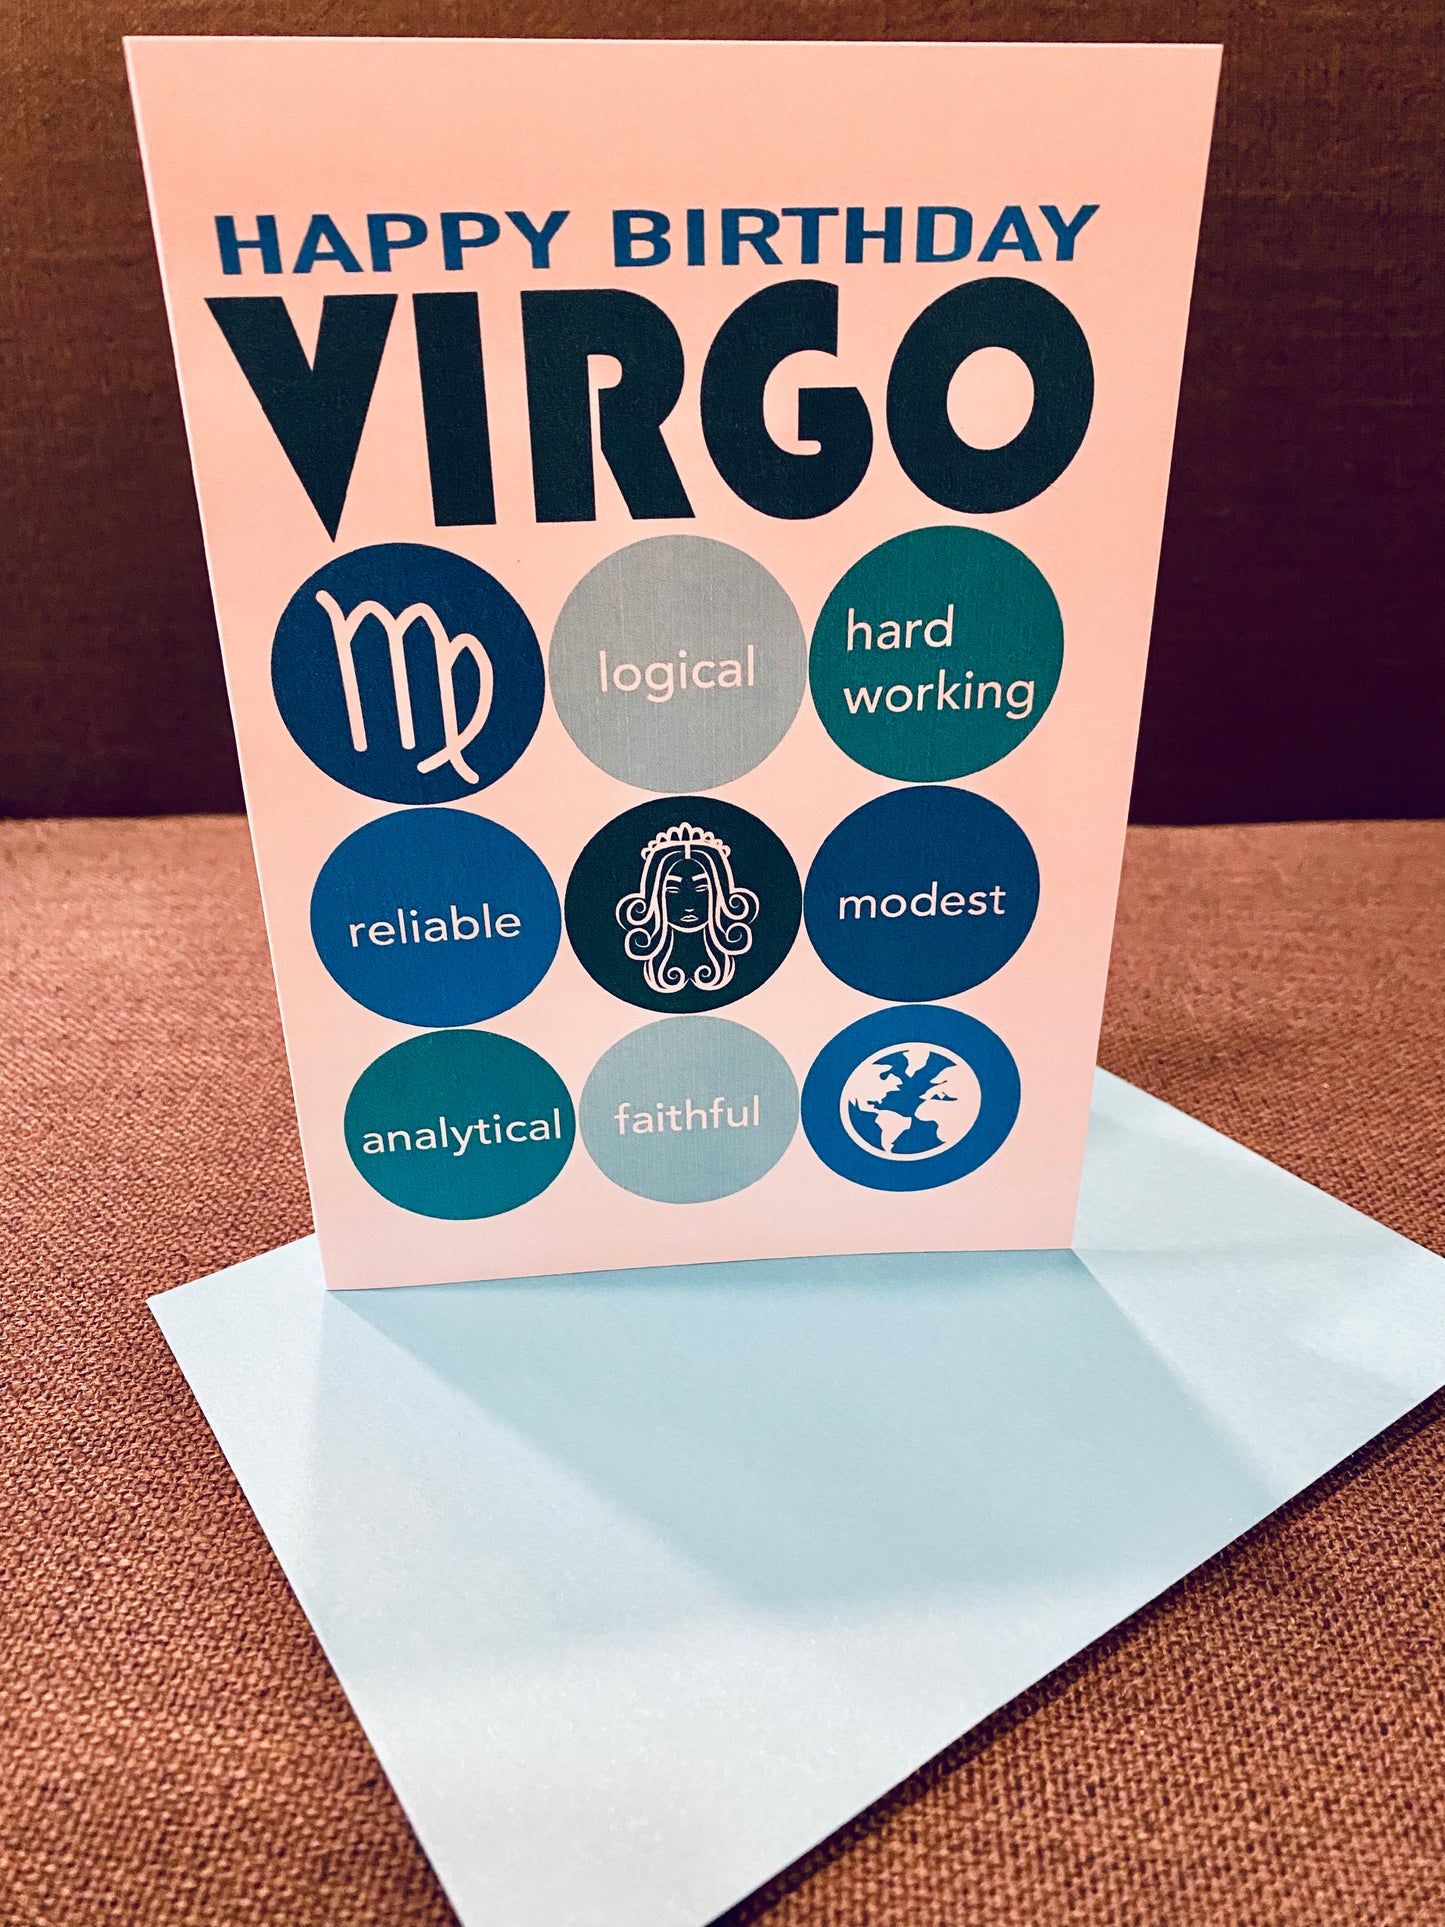 VIRGO HAPPY BIRTHDAY 5x7 Astrology Greeting Card with signs traits